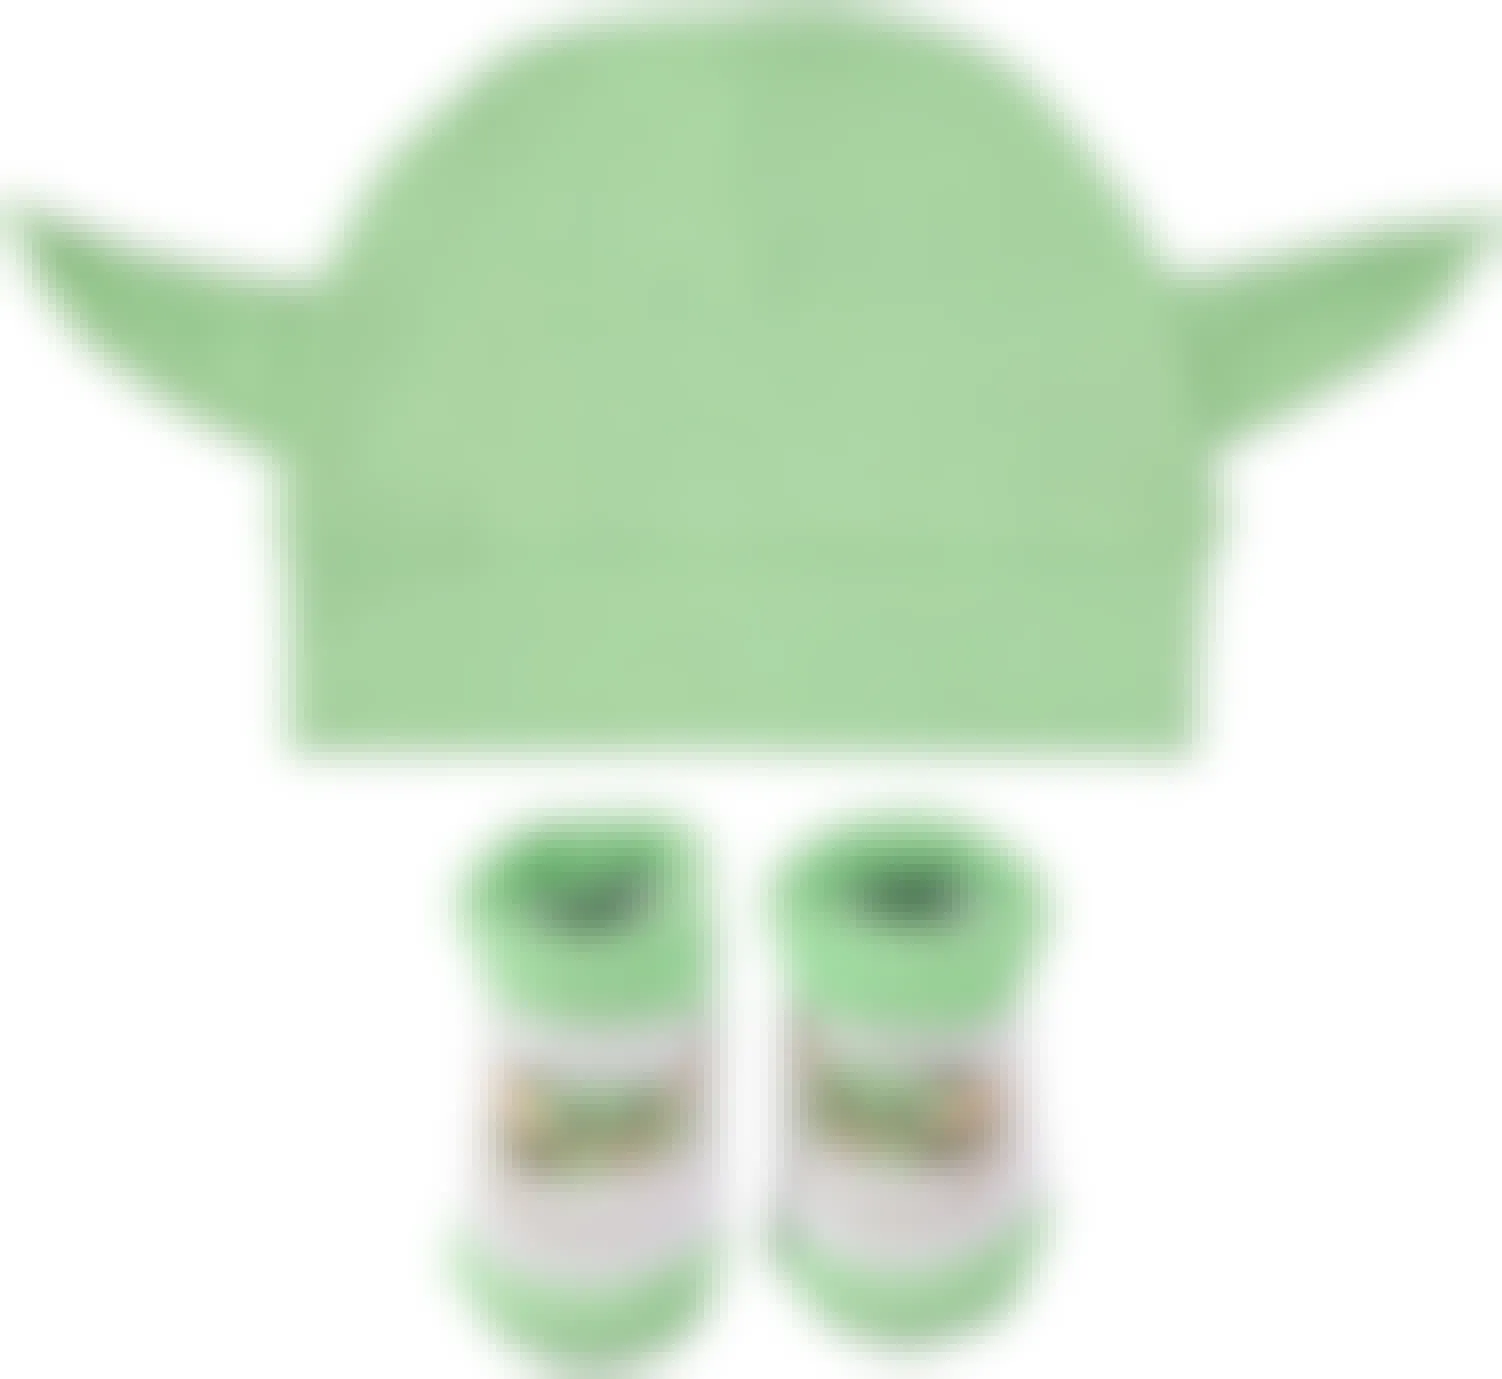 A Baby Yoda hat and matching socks on a white background.